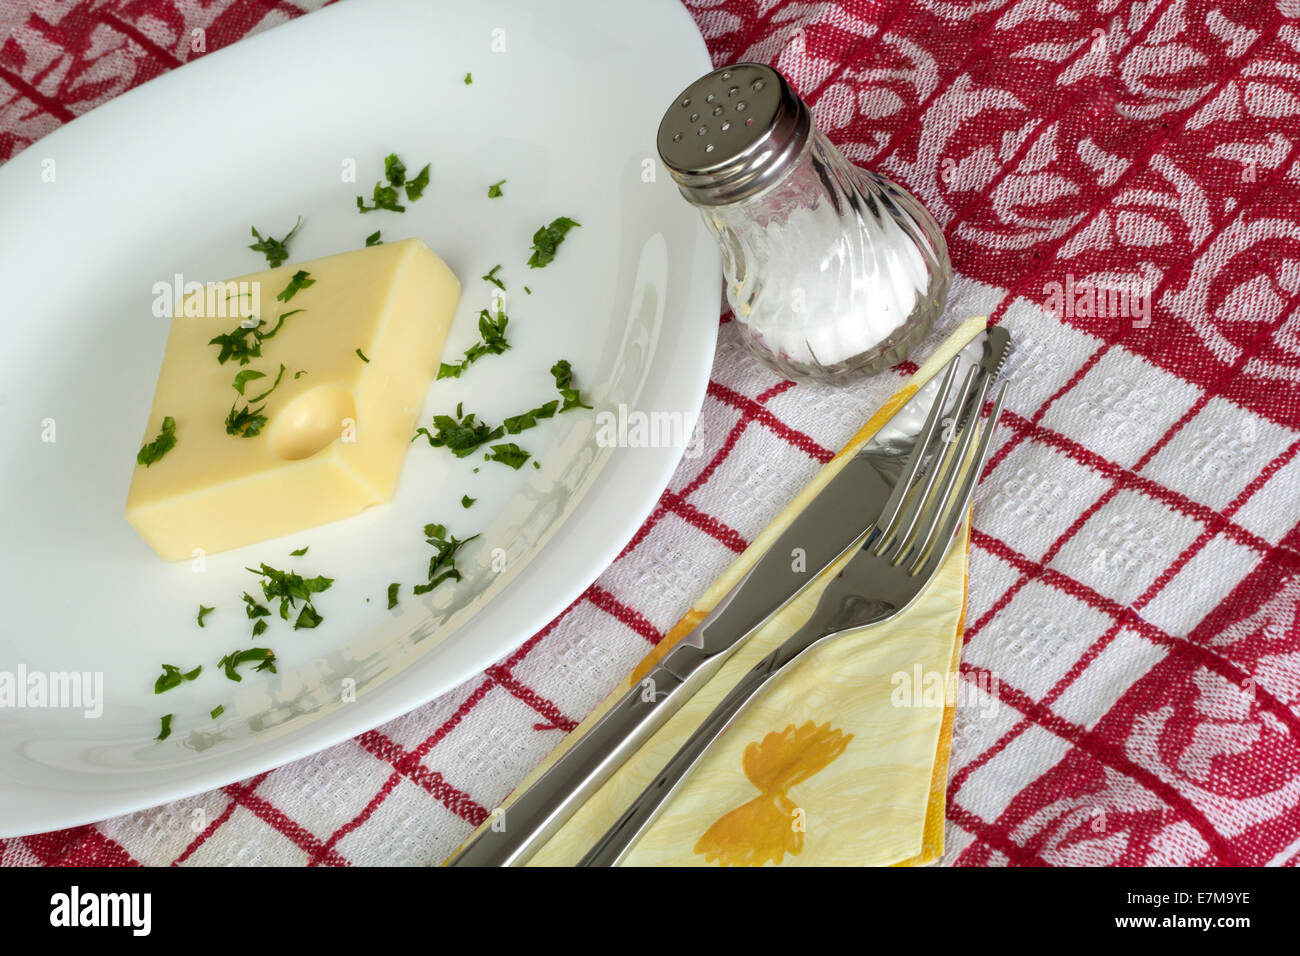 Swiss cheese on plate with knife and fork Stock Photo